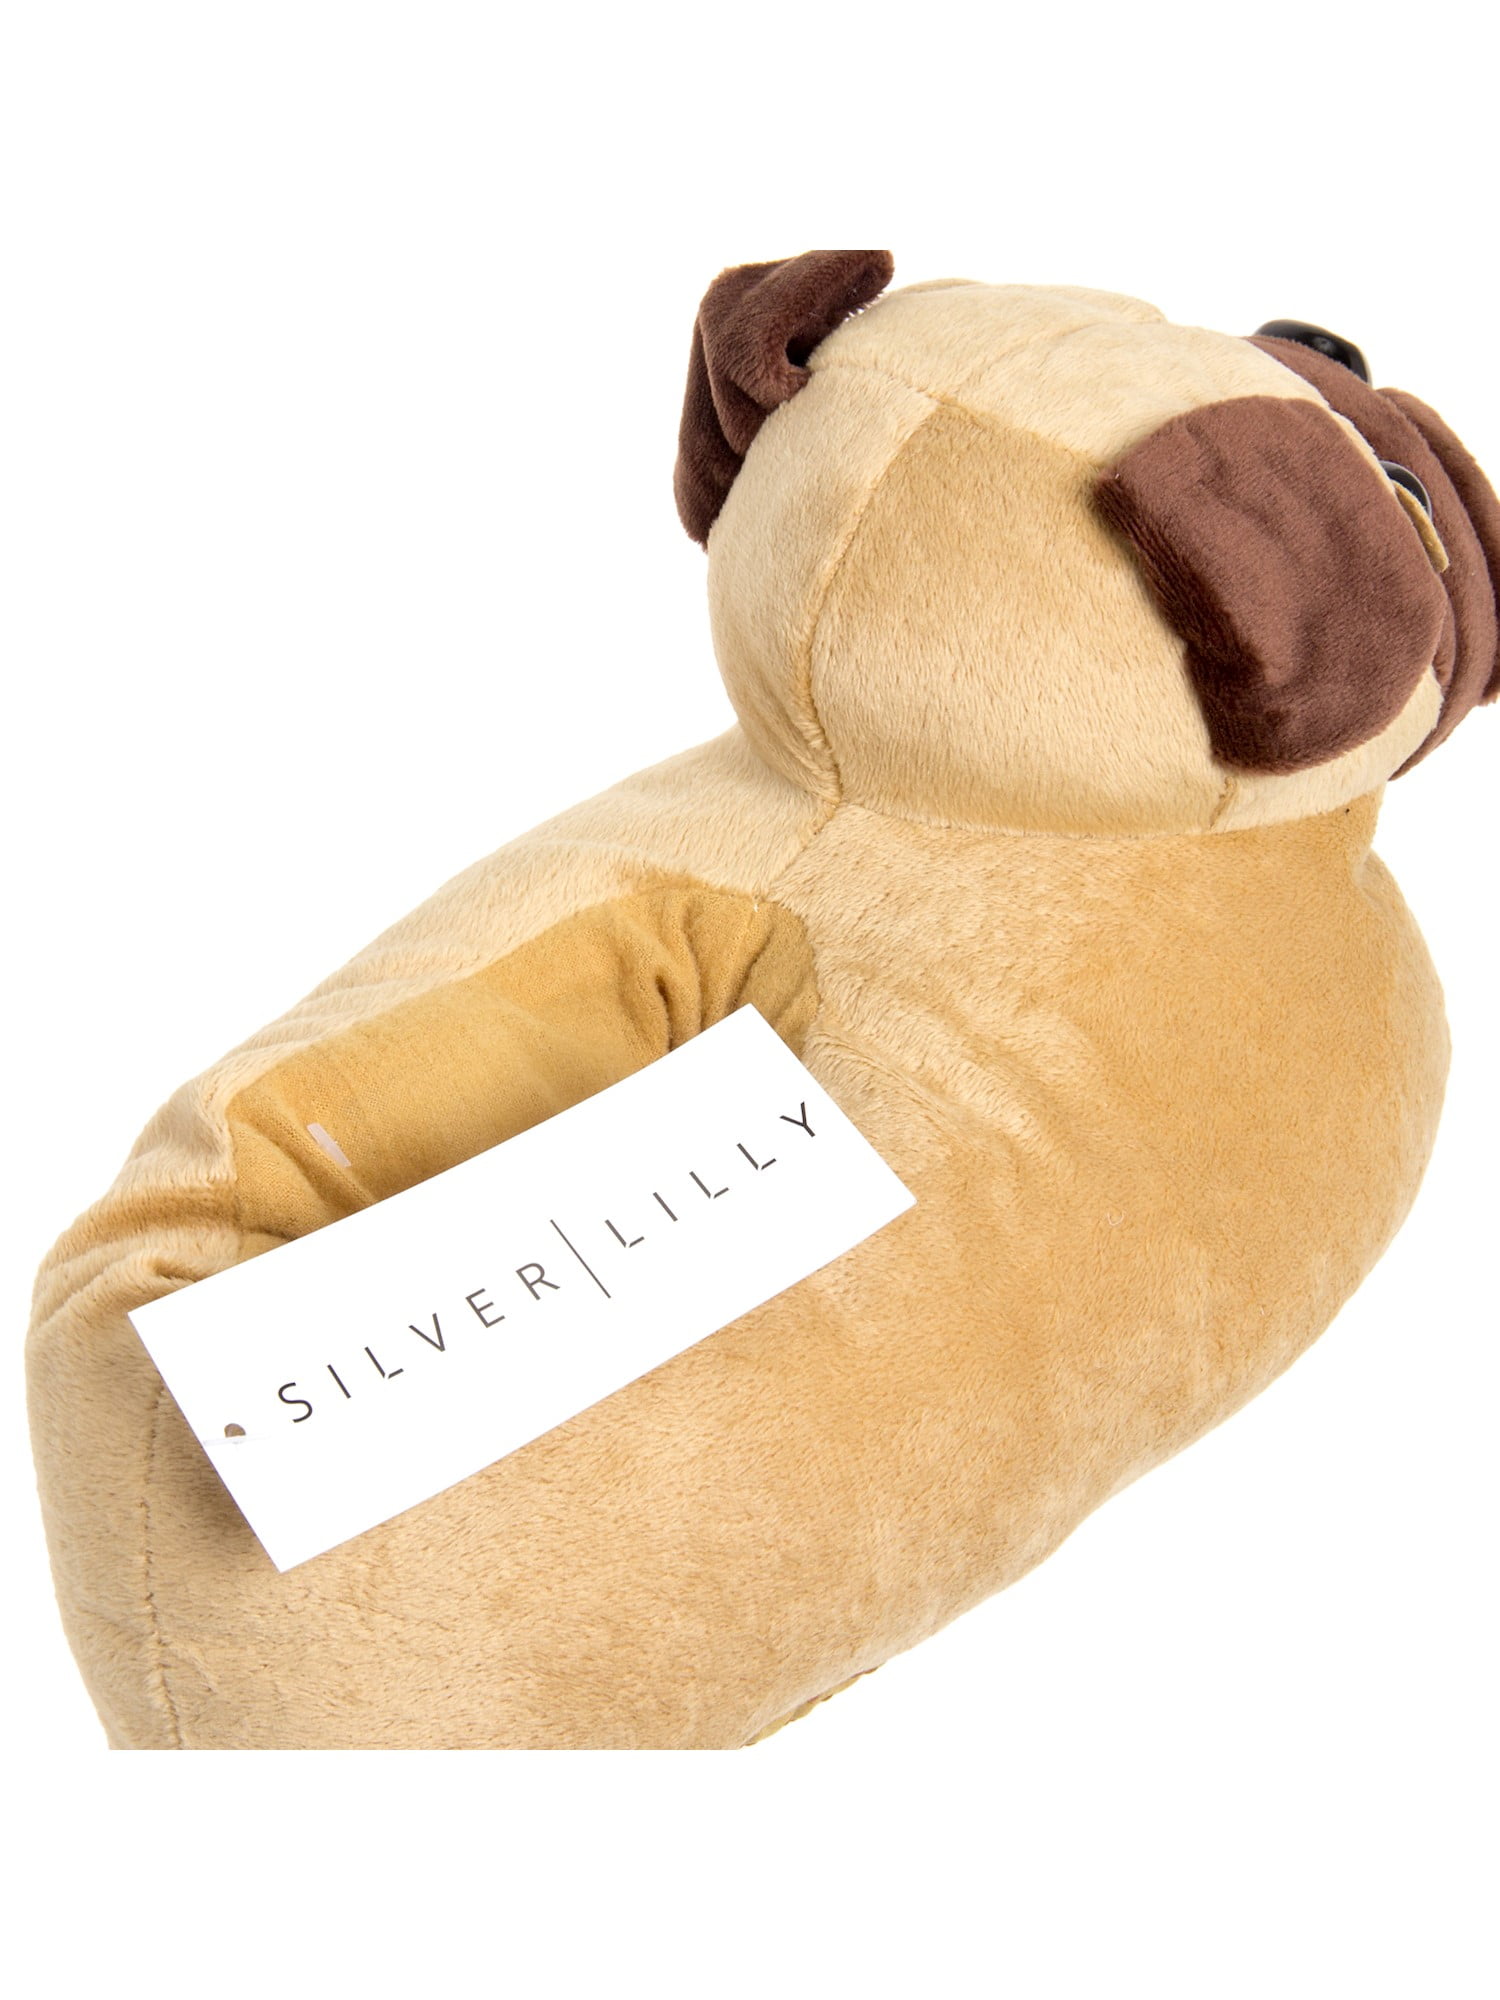 Plush Pug Dog Slippers by Silver Lilly 